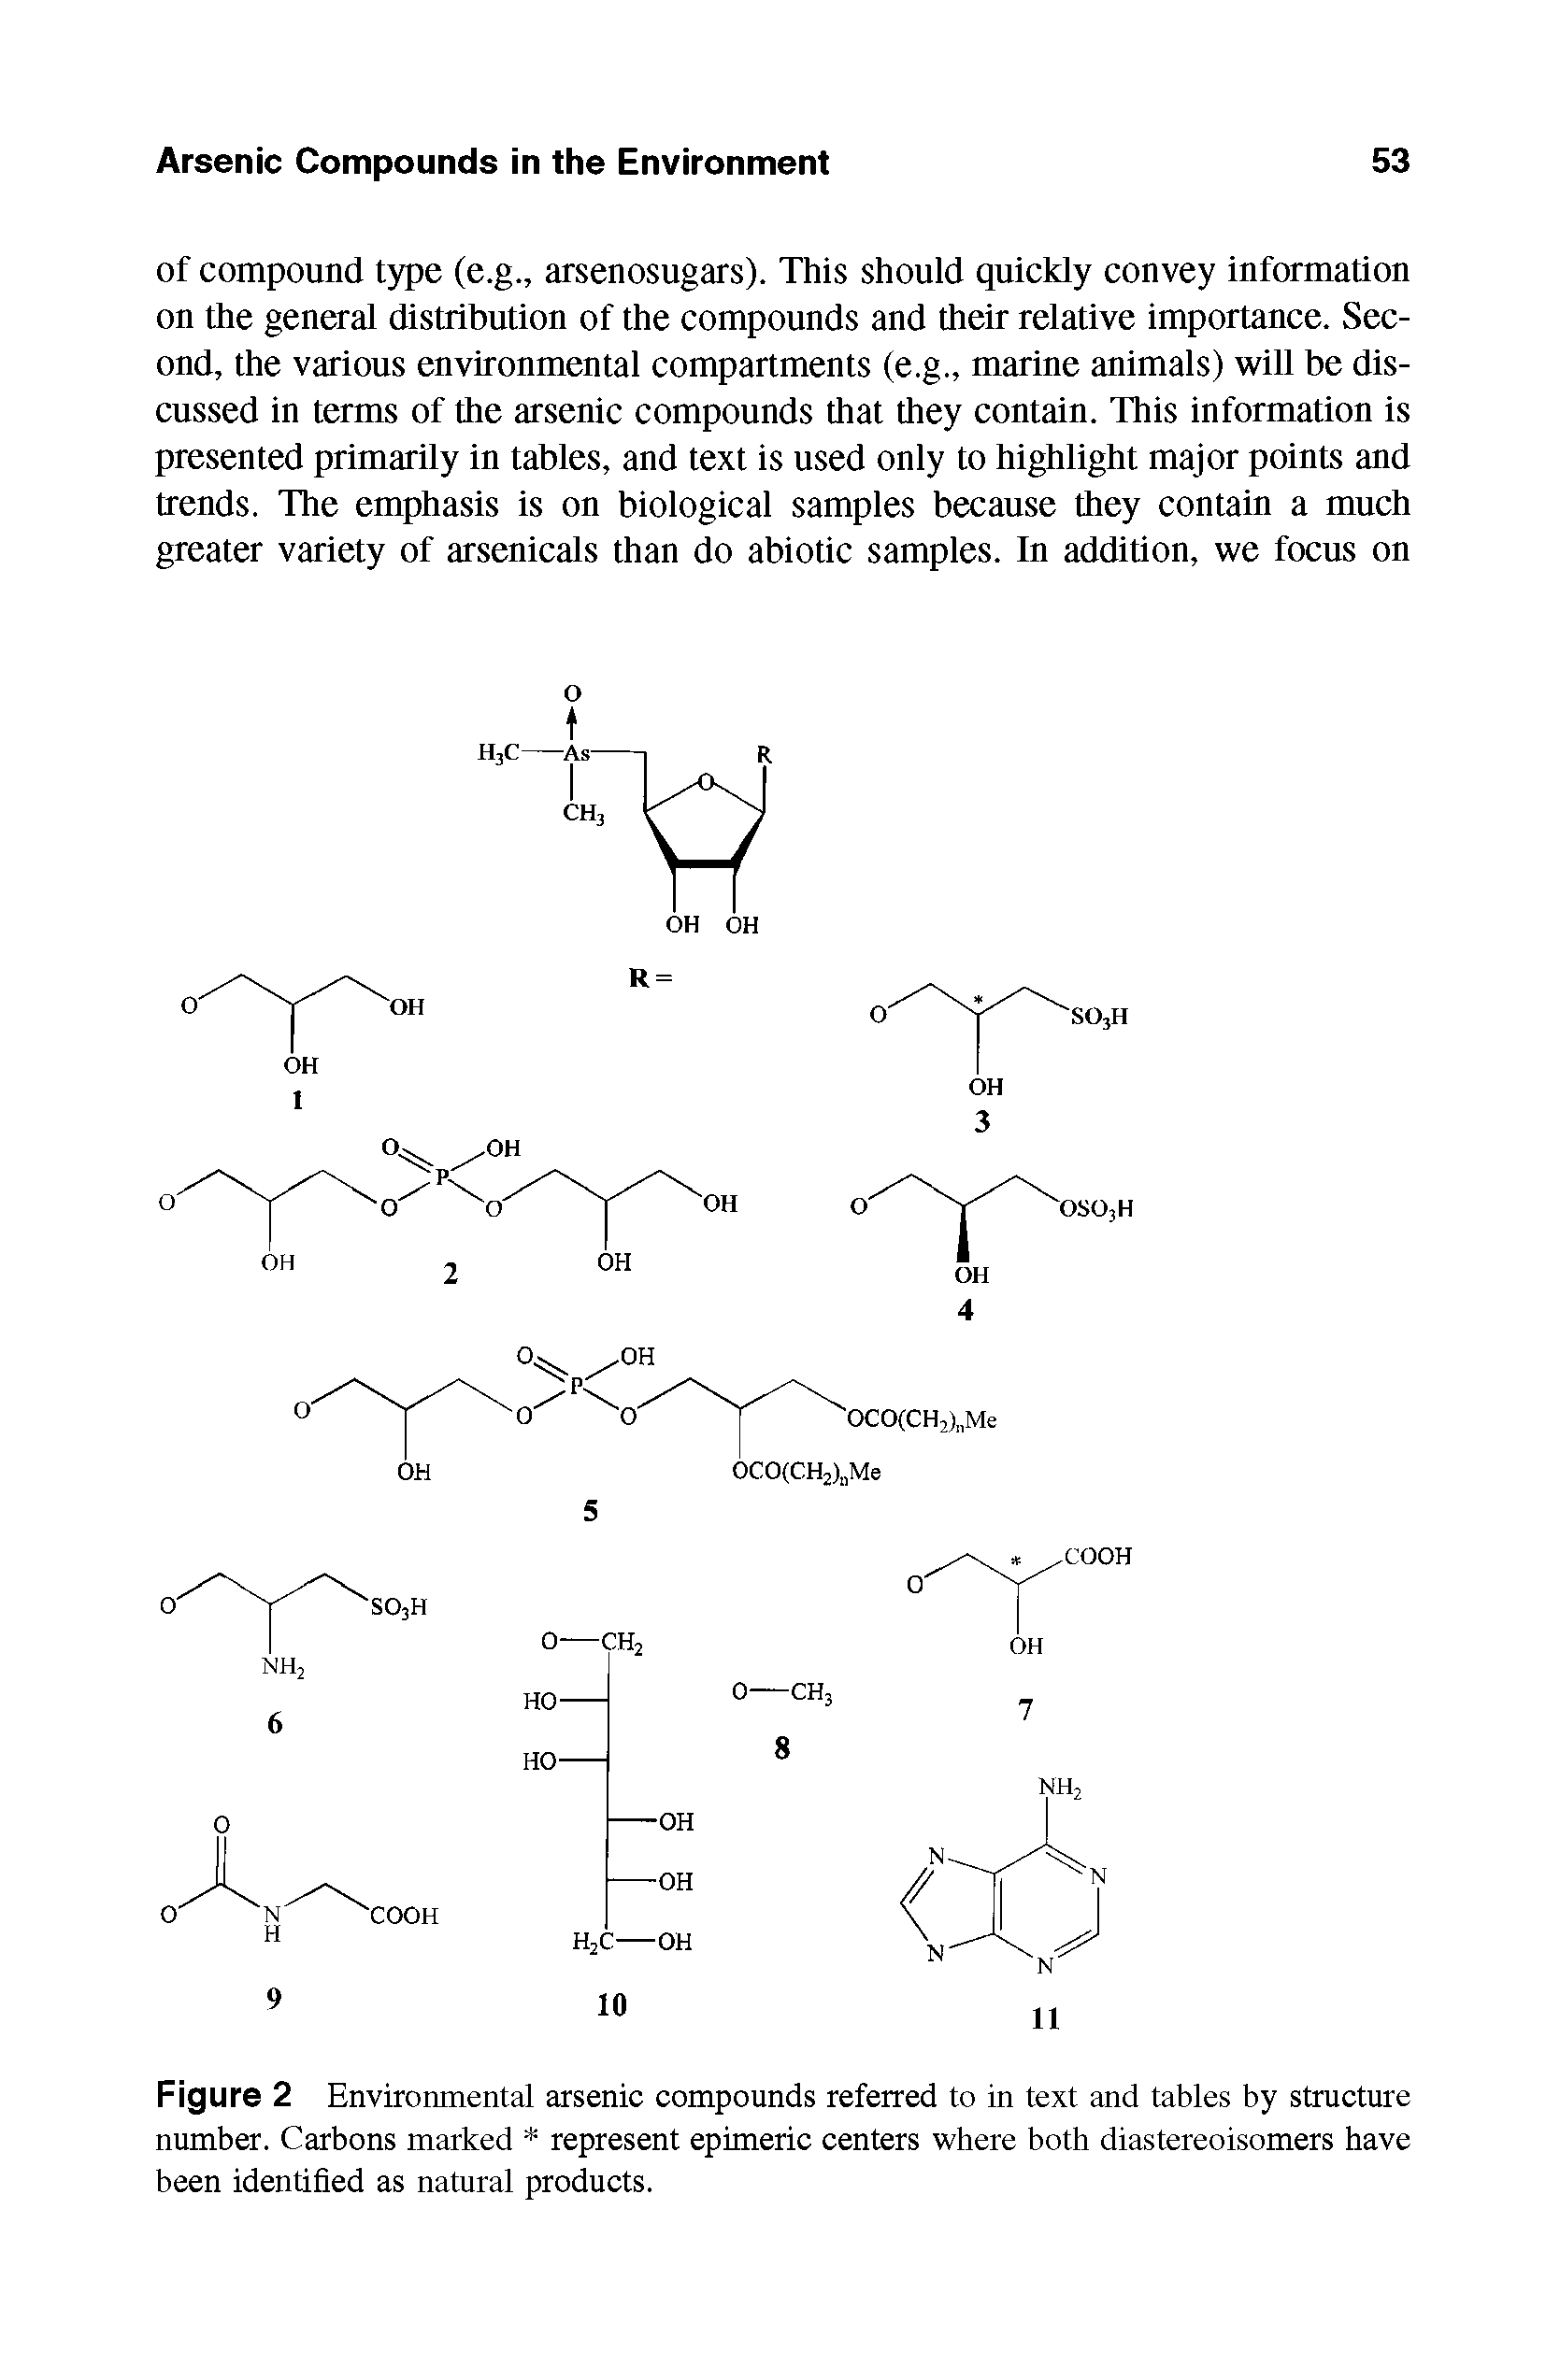 Figure 2 Environmental arsenic compounds referred to in text and tables by structure number. Carbons marked represent epimeric centers where both diastereoisomers have been identified as natural products.